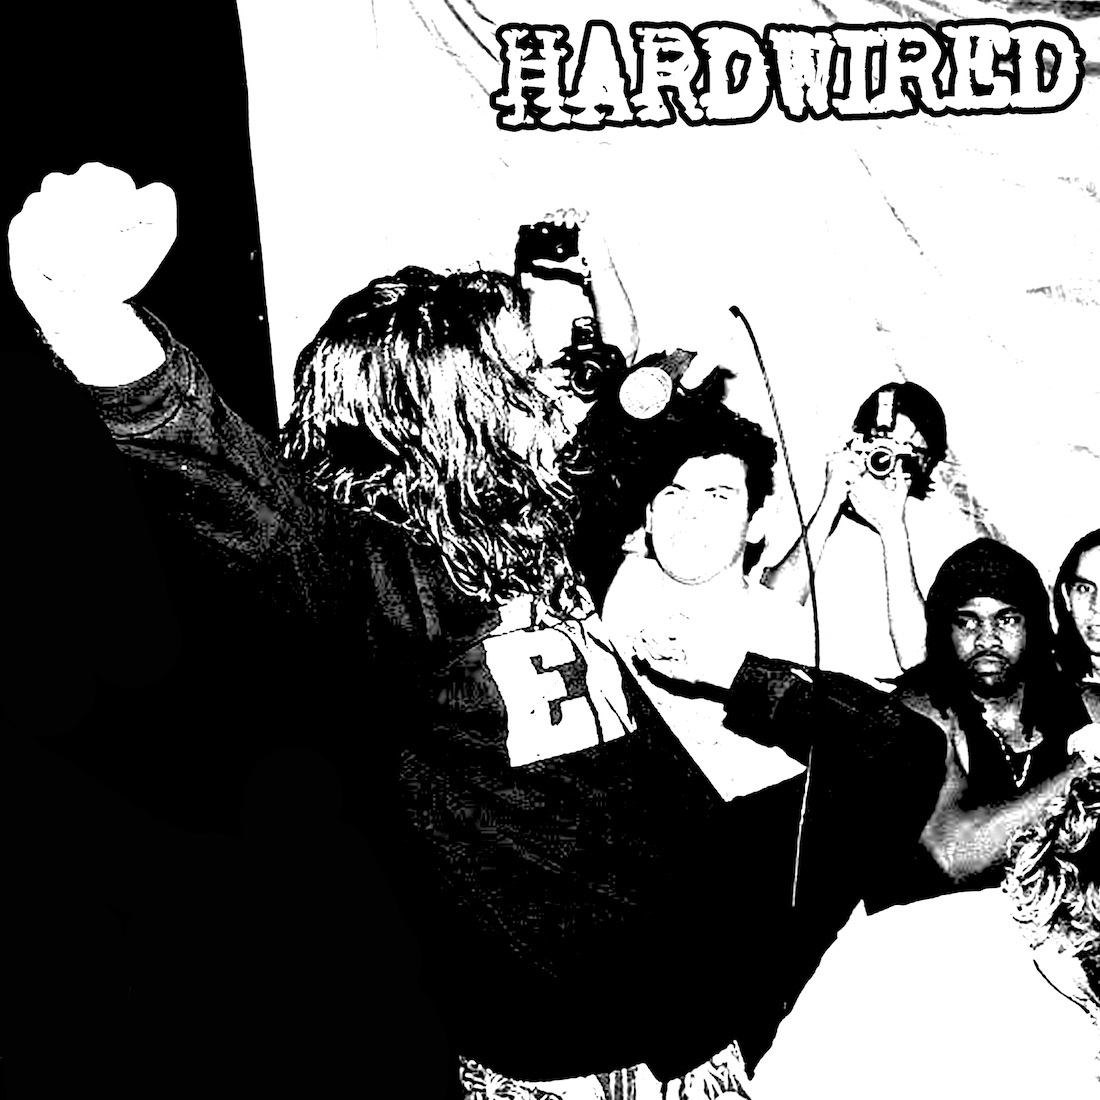 Hardwired 7″ now available